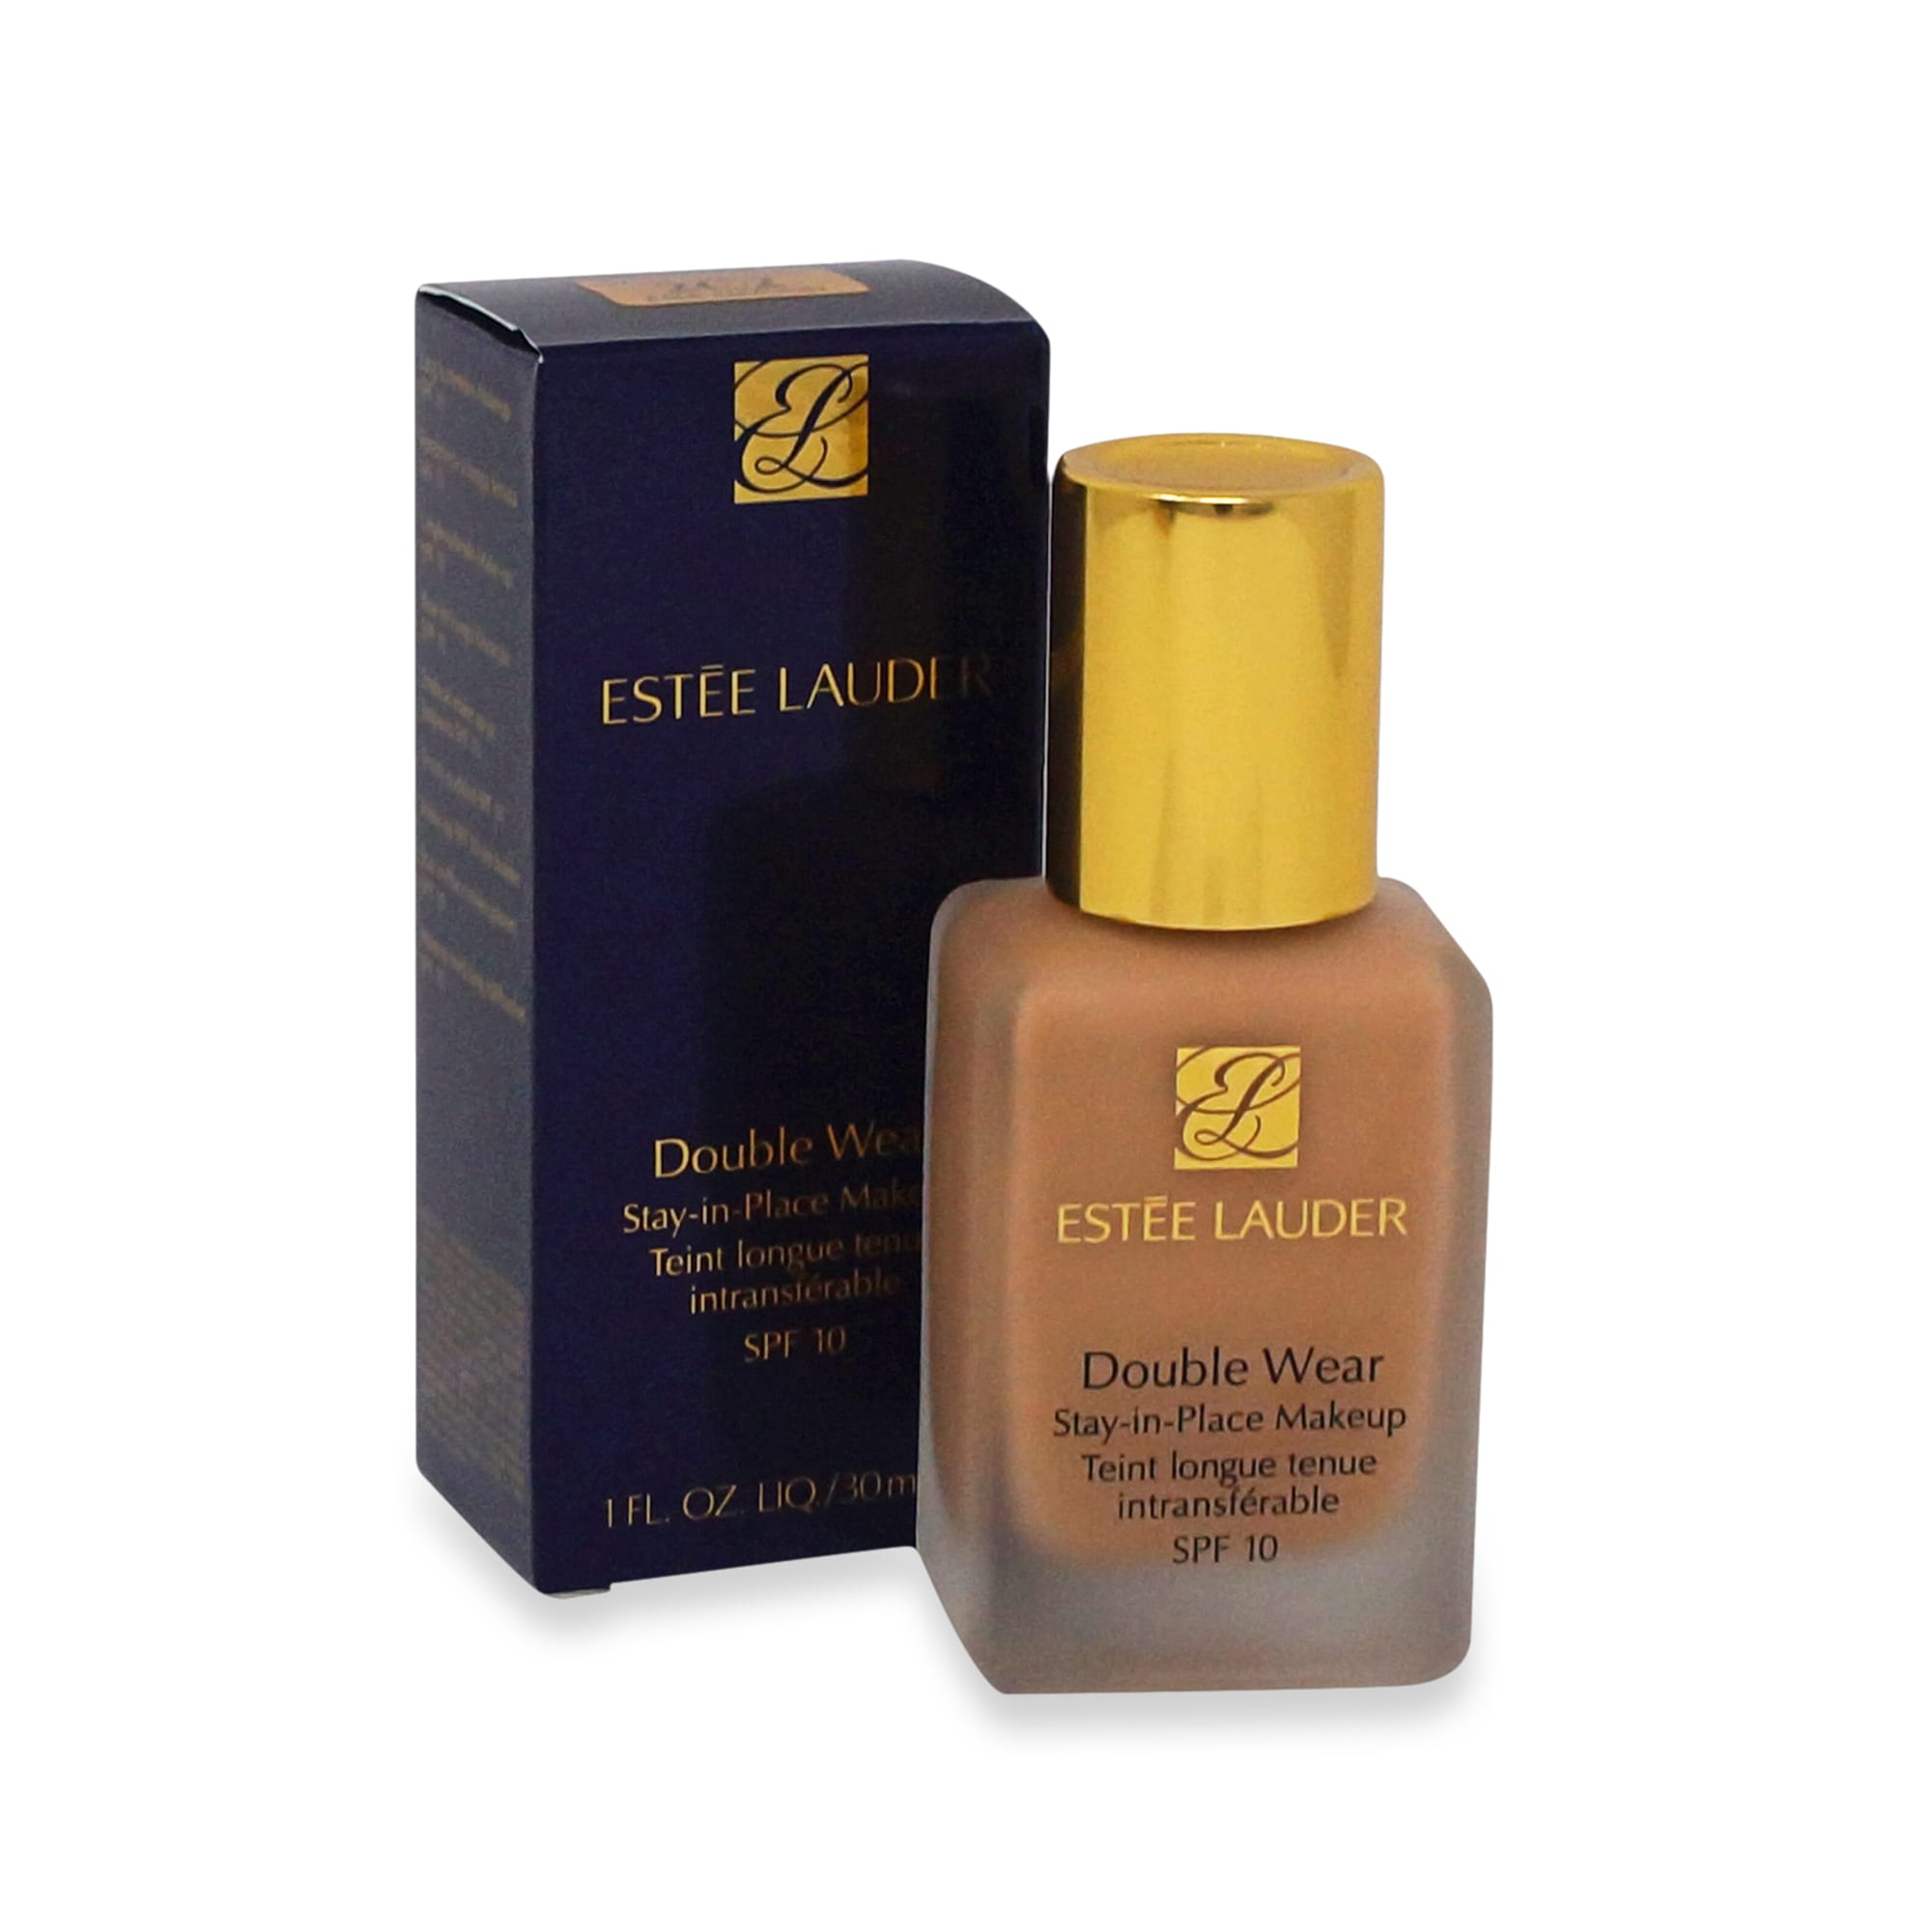 Double Wear Foundation Sample Stay-in-Place Makeup SPF 10 | Estee Lauder - Official Site